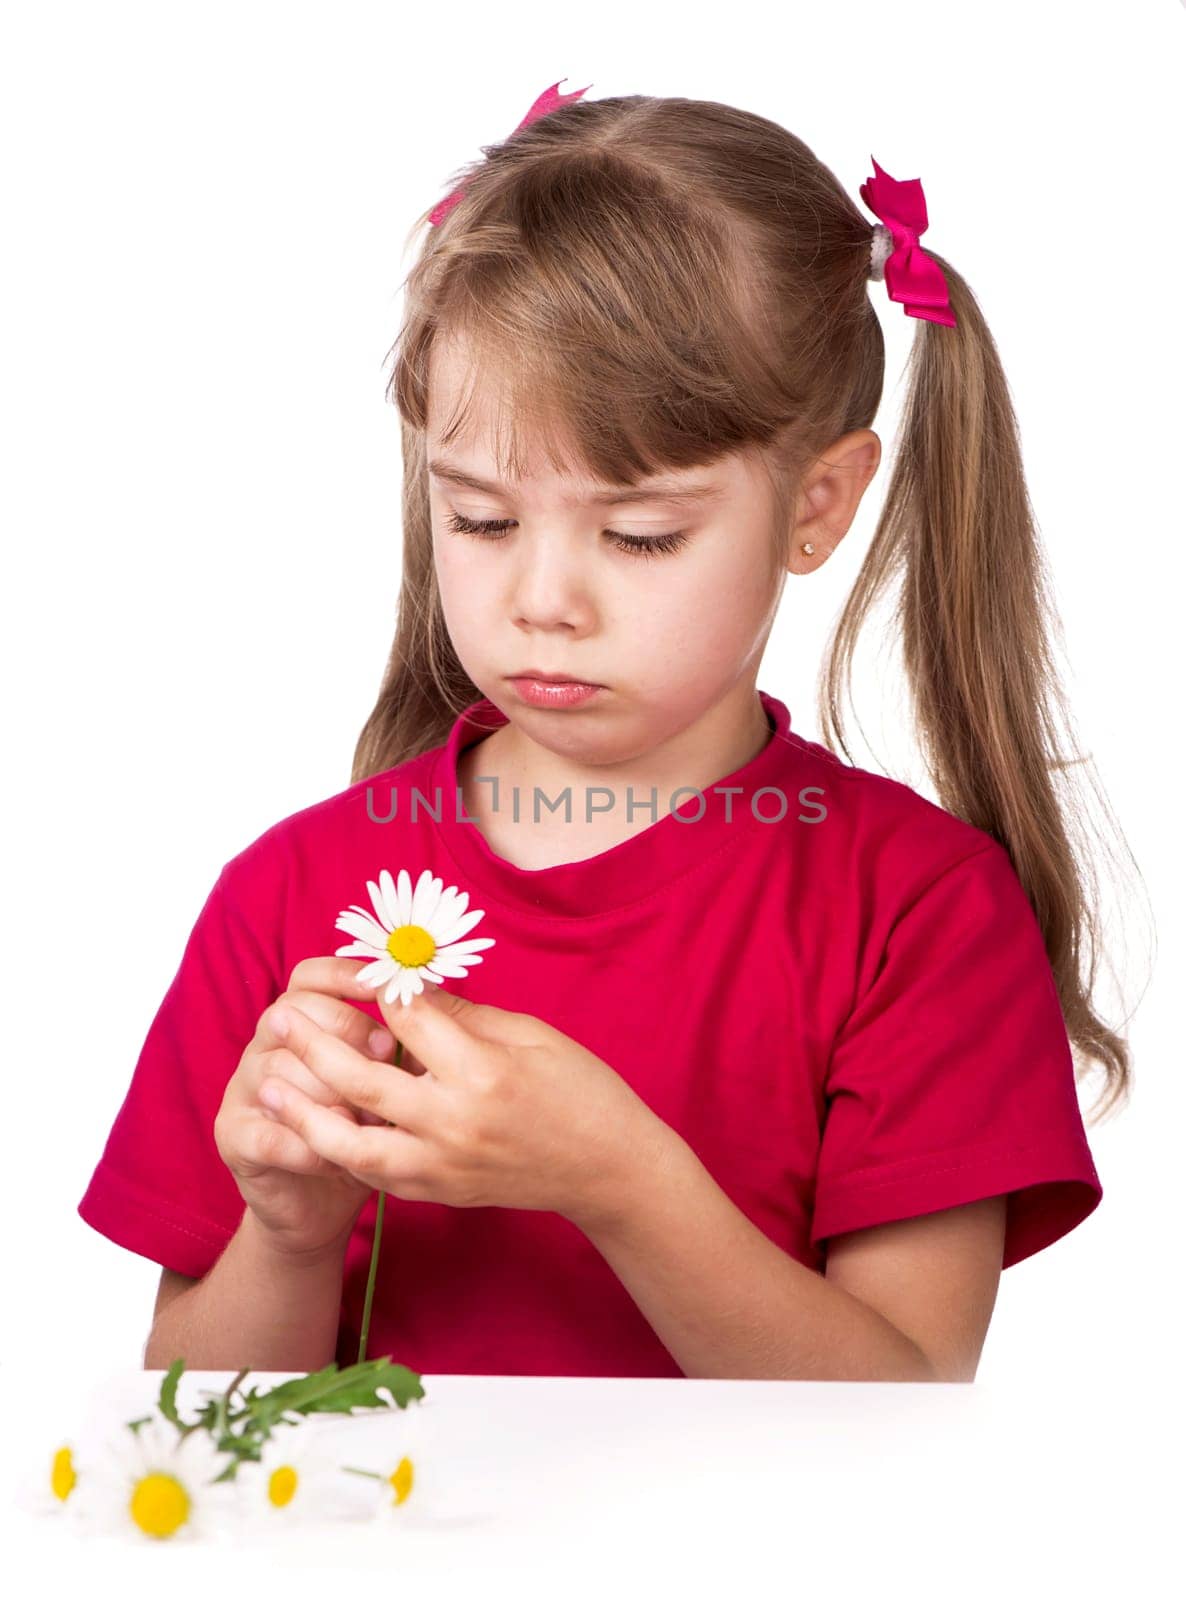 Portrait of a little blonde girl with bows in a pink t-shirt with a camomile flower on a white background by aprilphoto